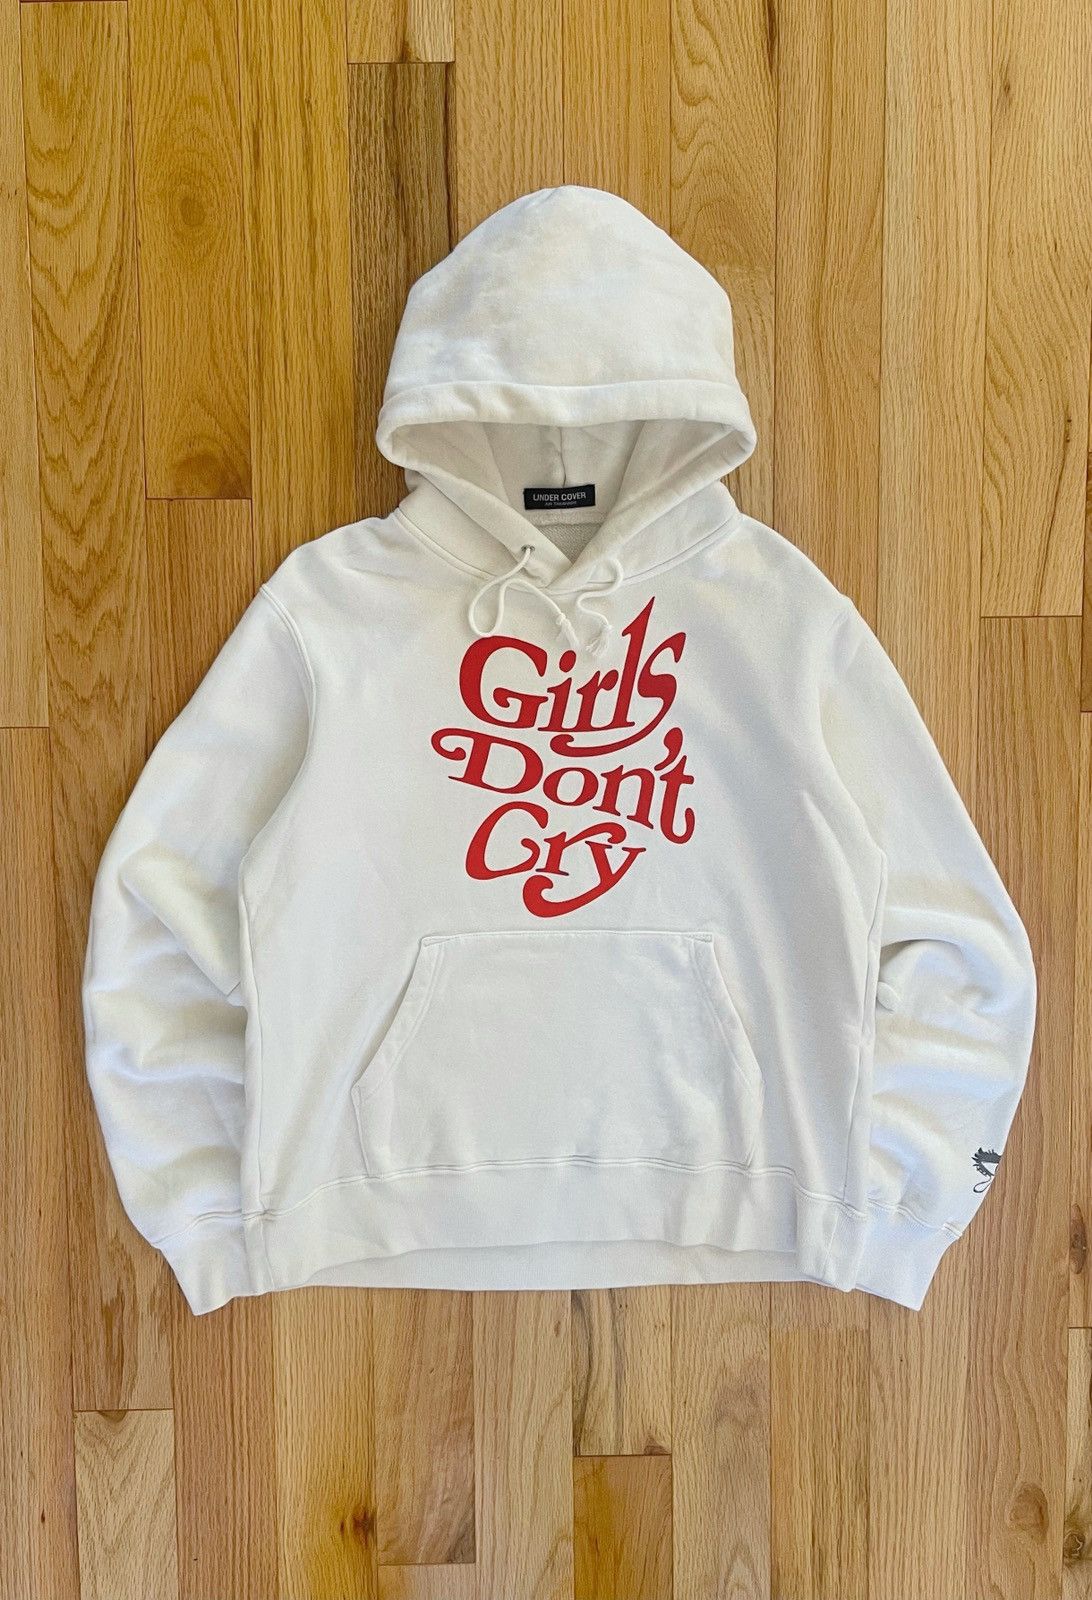 Undercover SS2018 Undercover x Verdy Girls Don't Cry Pullover 